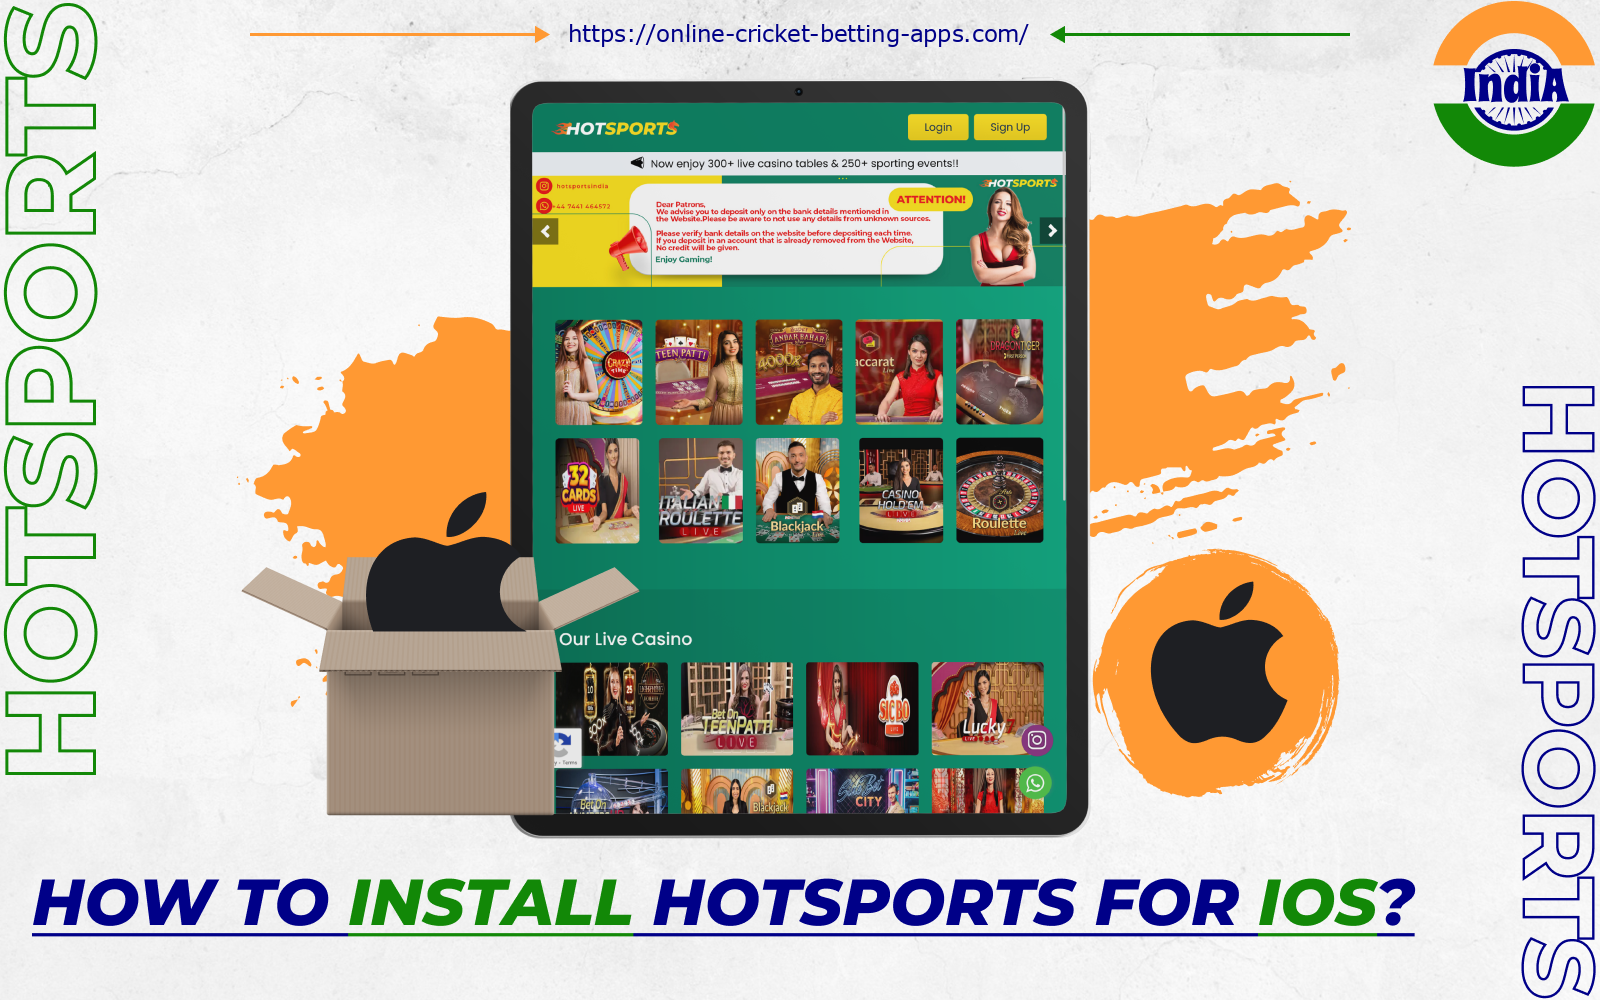 After installing the HotSports betting app on iOS, players from India can bet and play in casinos